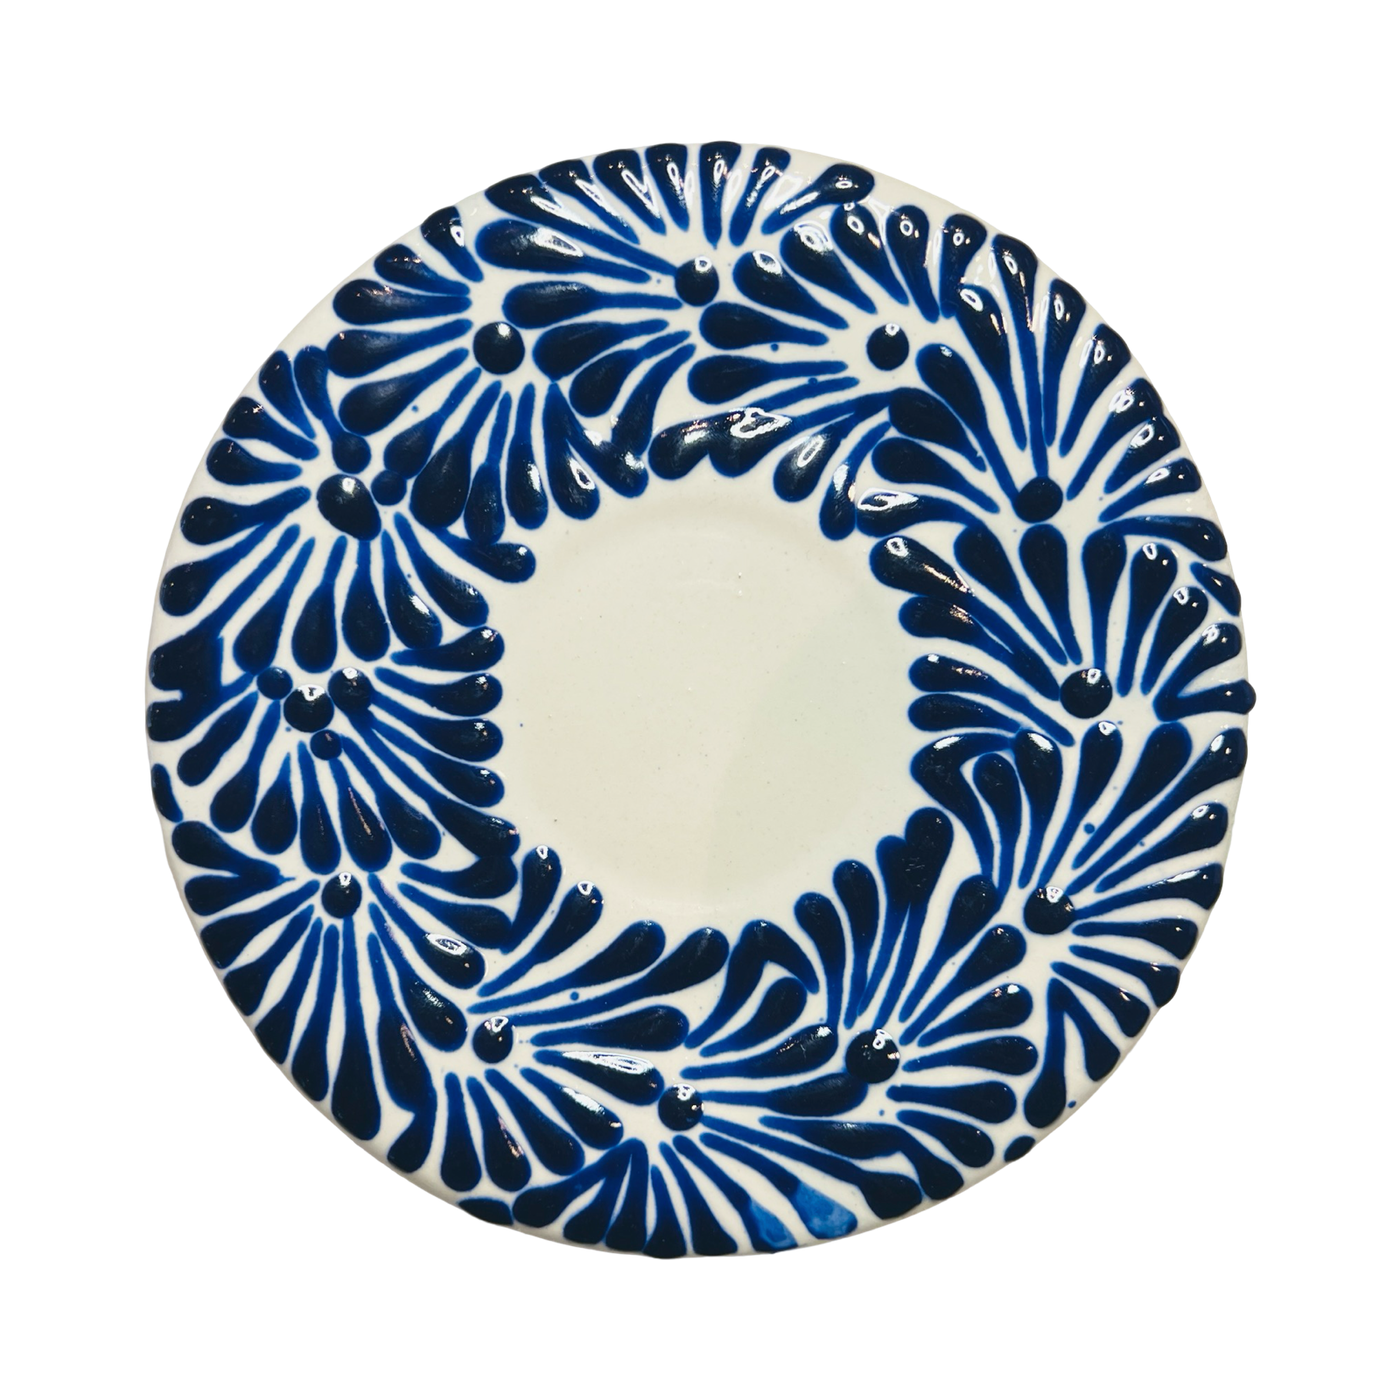 Top view of a blue and white Puebla talavera round plate